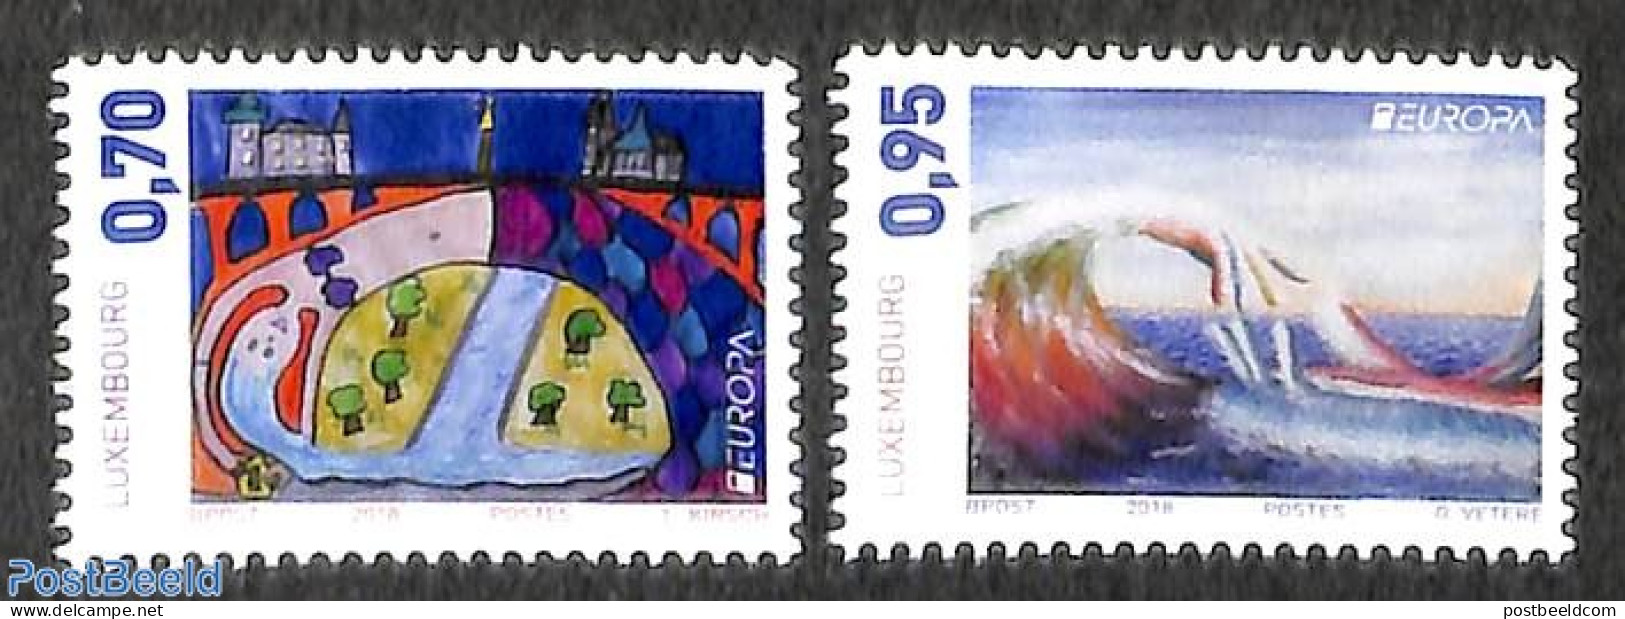 Luxemburg 2018 Europa, Bridges 2v, Mint NH, History - Europa (cept) - Art - Bridges And Tunnels - Children Drawings - Unused Stamps